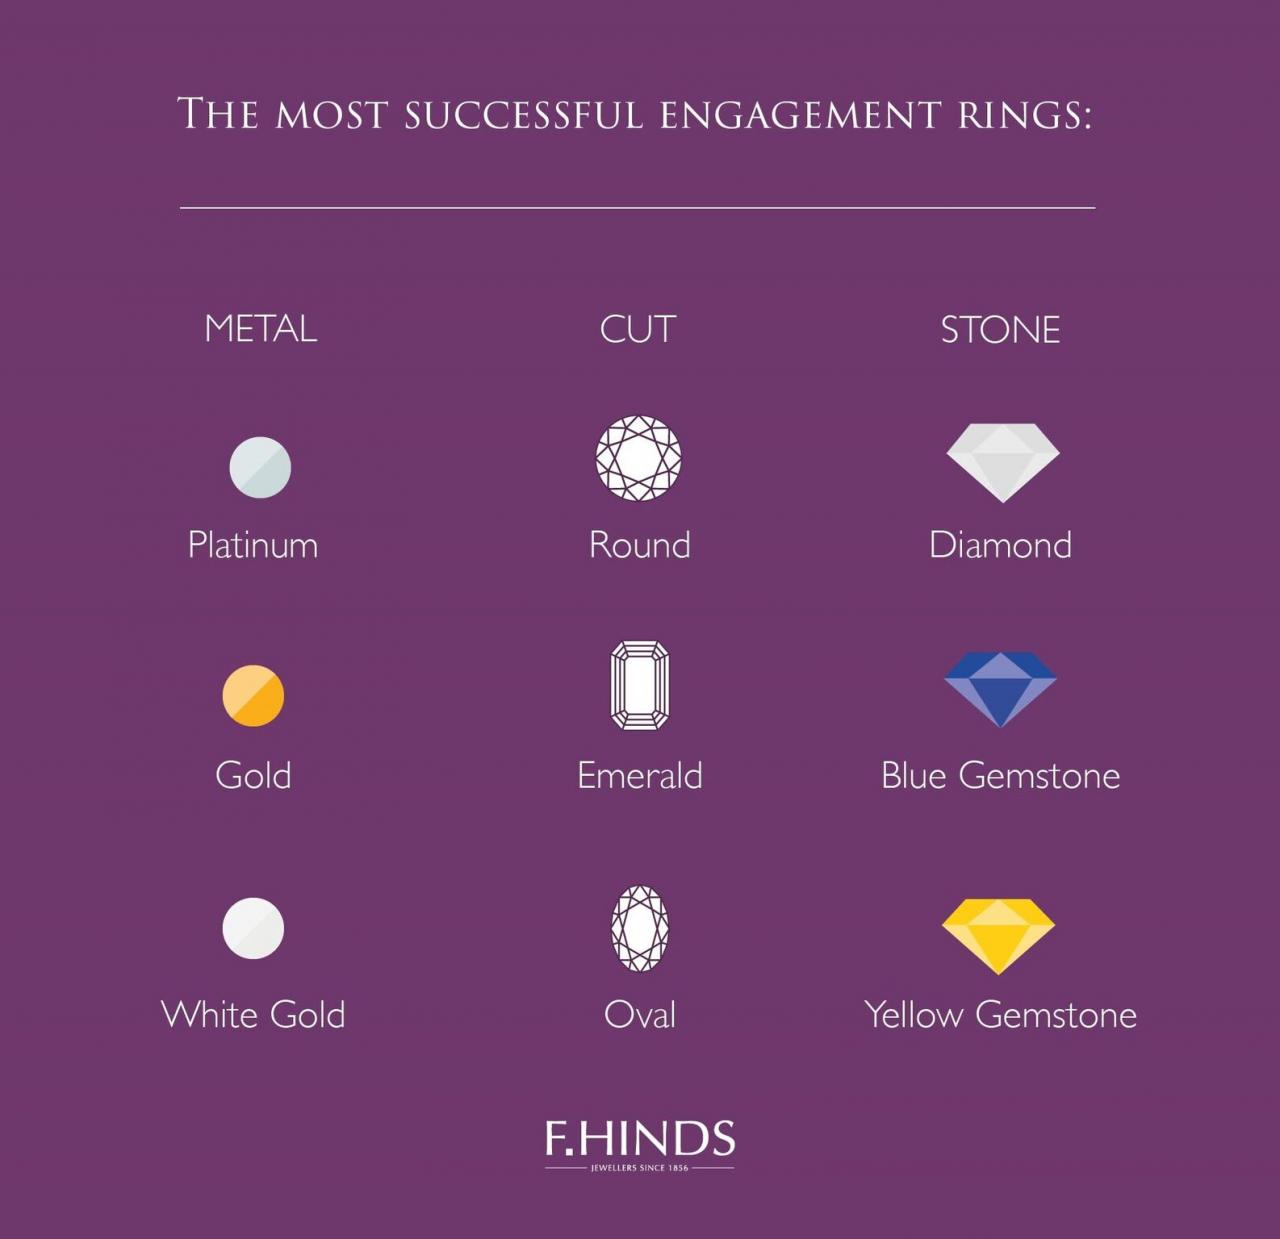 The most successful engagement rings